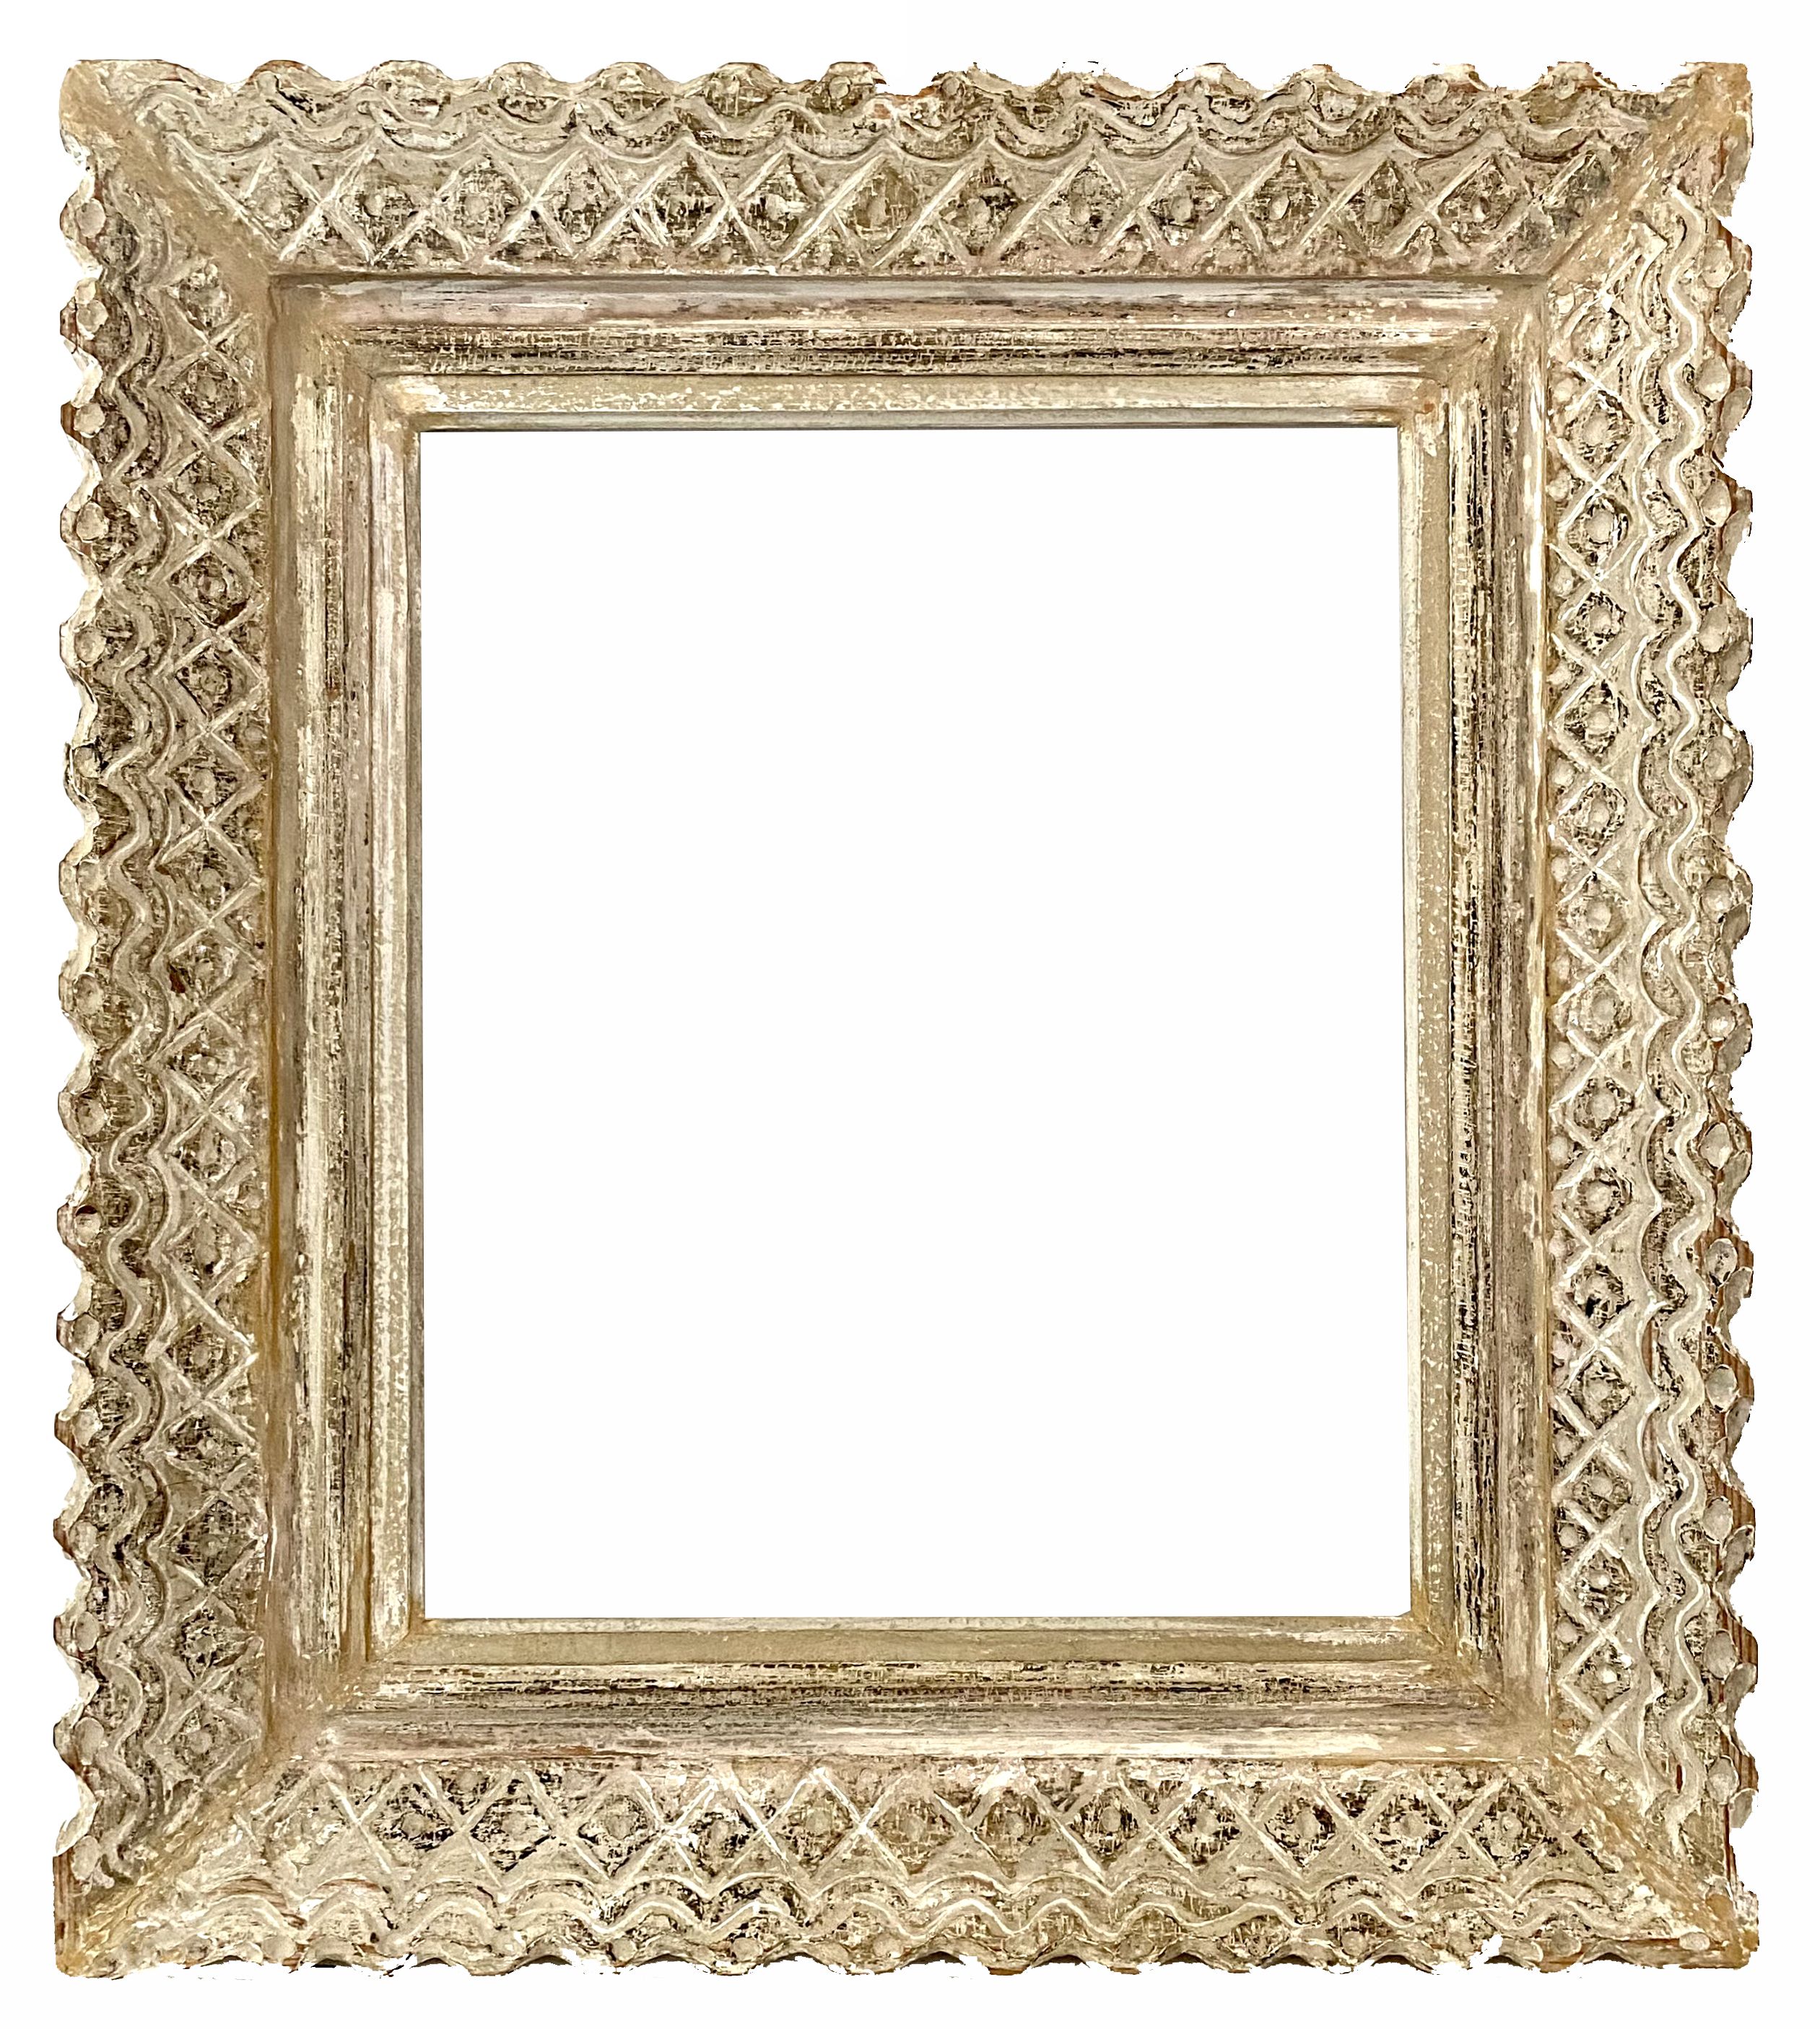 Mouth Frame - 46.60 X 38.50 - Ref - 1672